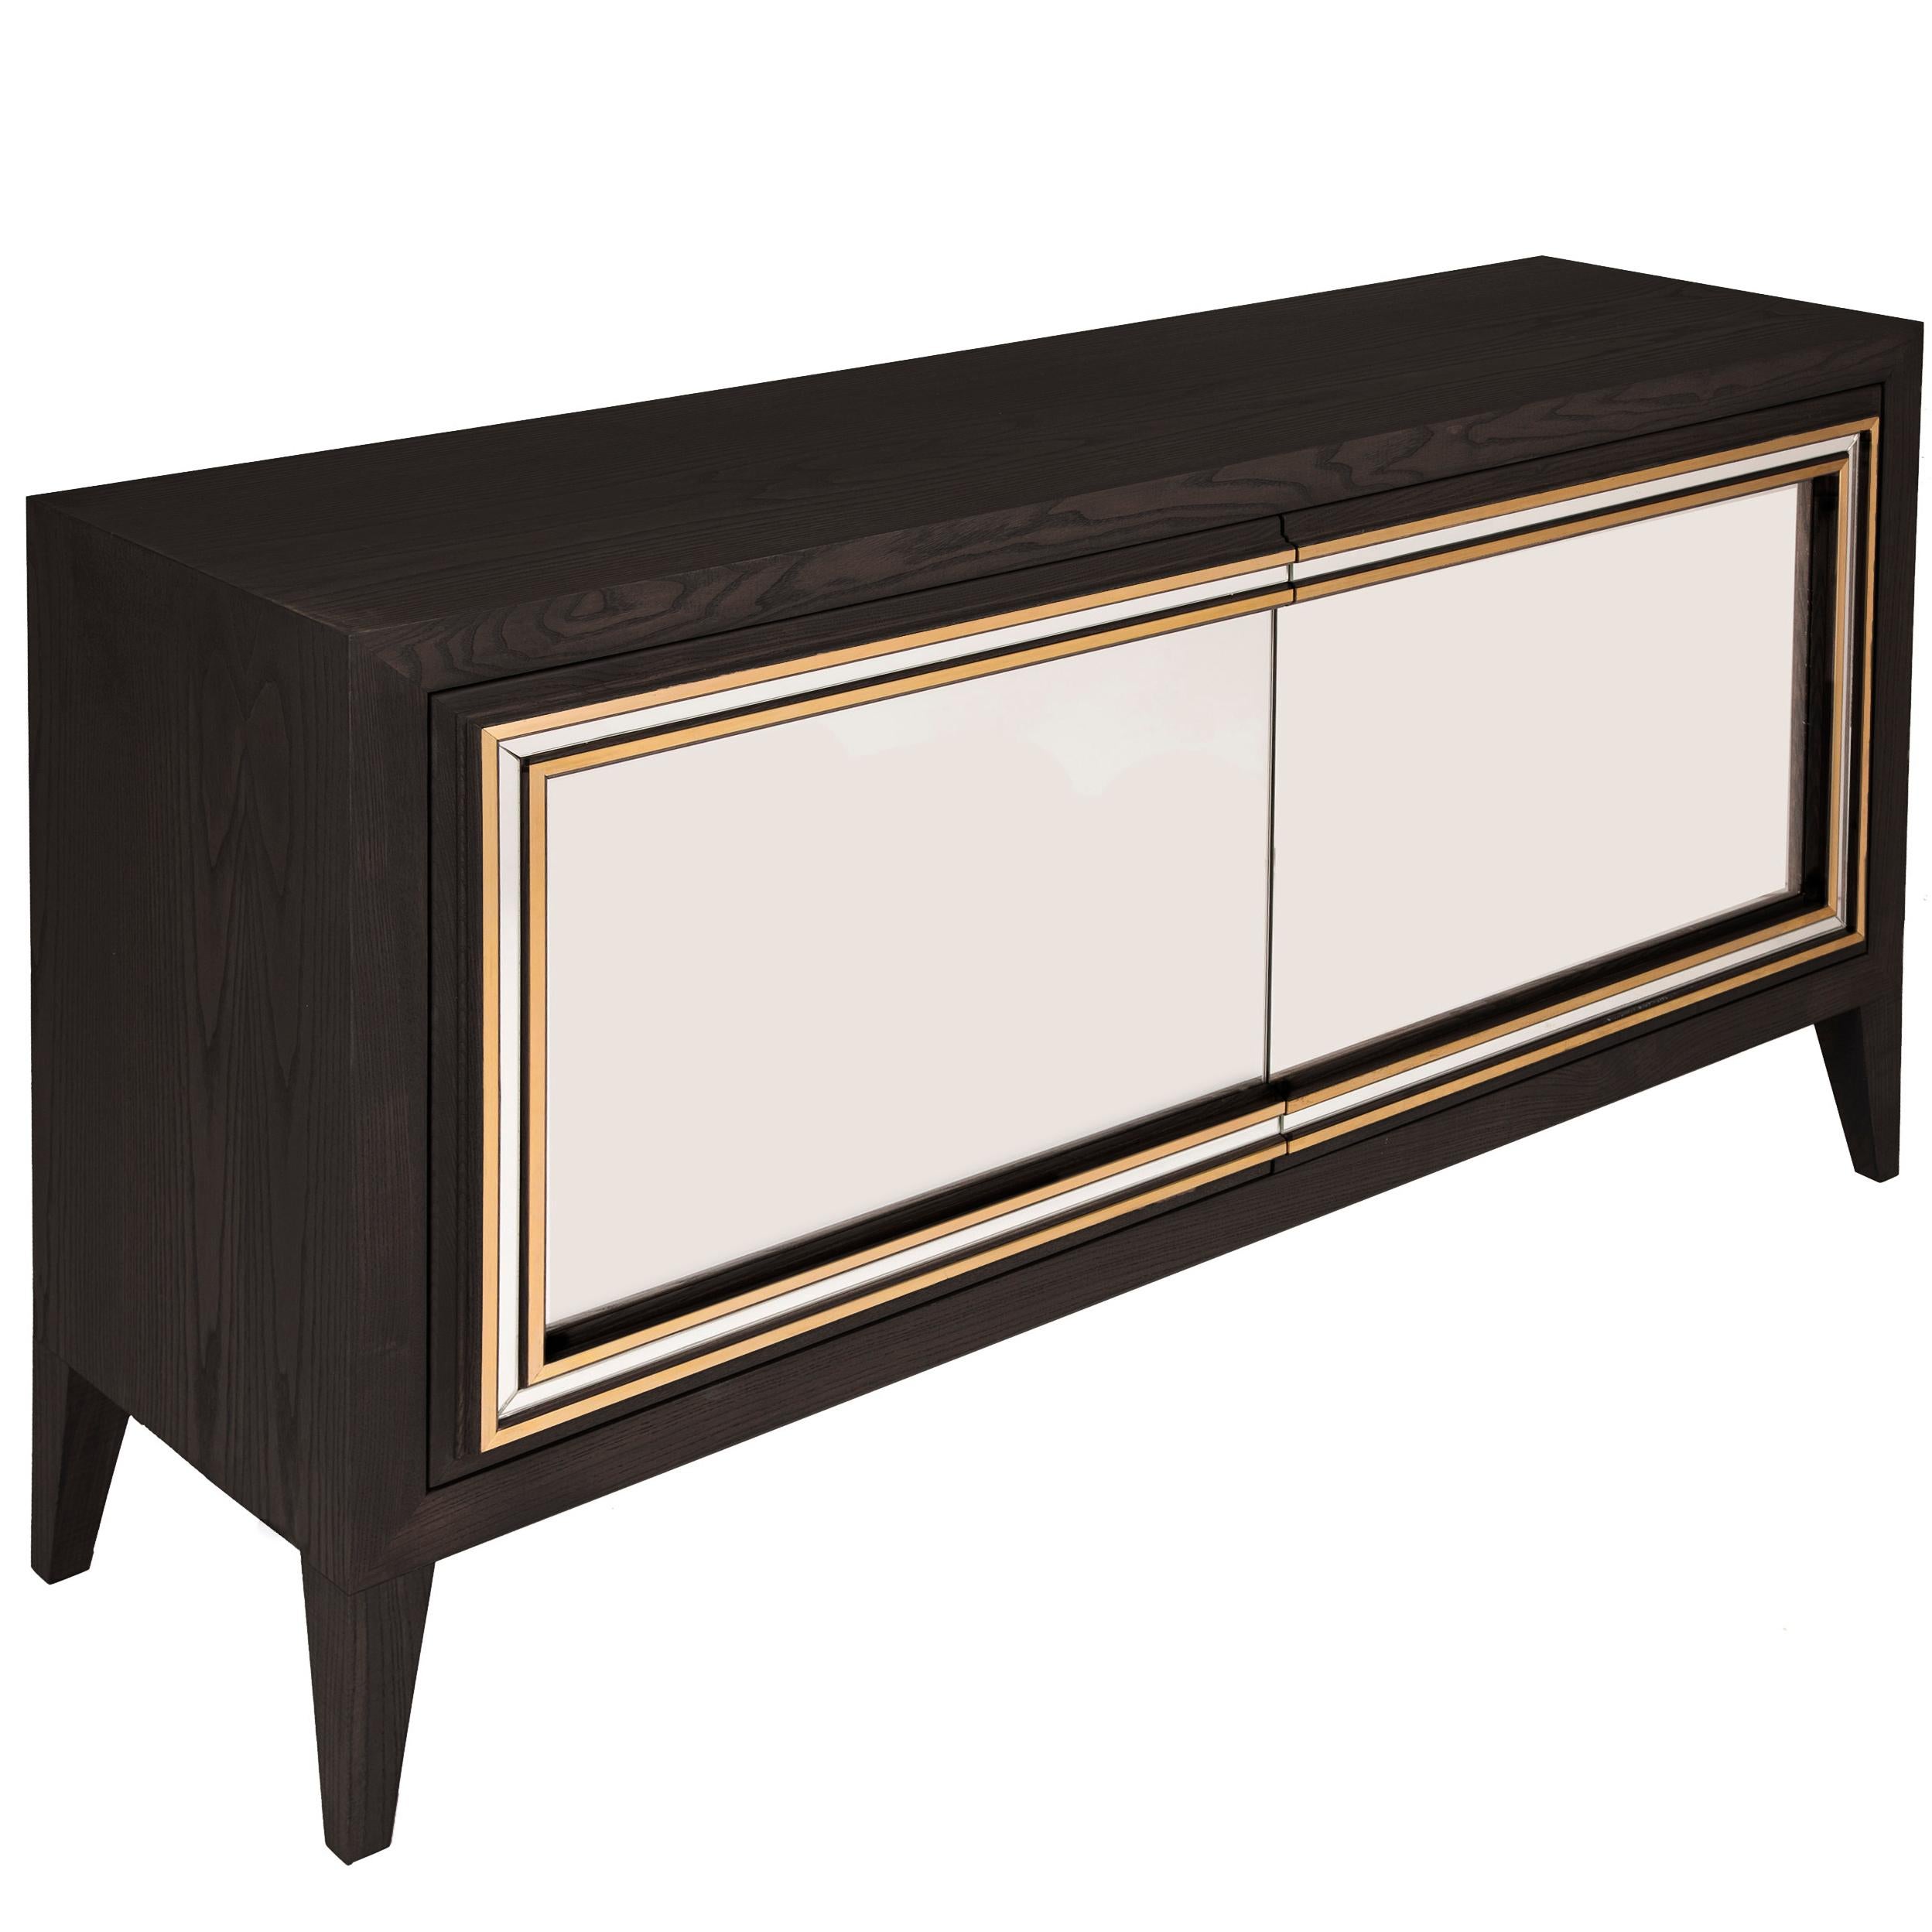 Black (RAL 9004) satin lacquered sideboard with two push-to-open doors, mirror and brass trim detailing and shelf in the middle. Also available in white (RAL 9001) or natural satin lacquered color finish. Bespoke dimensions and finishes available on